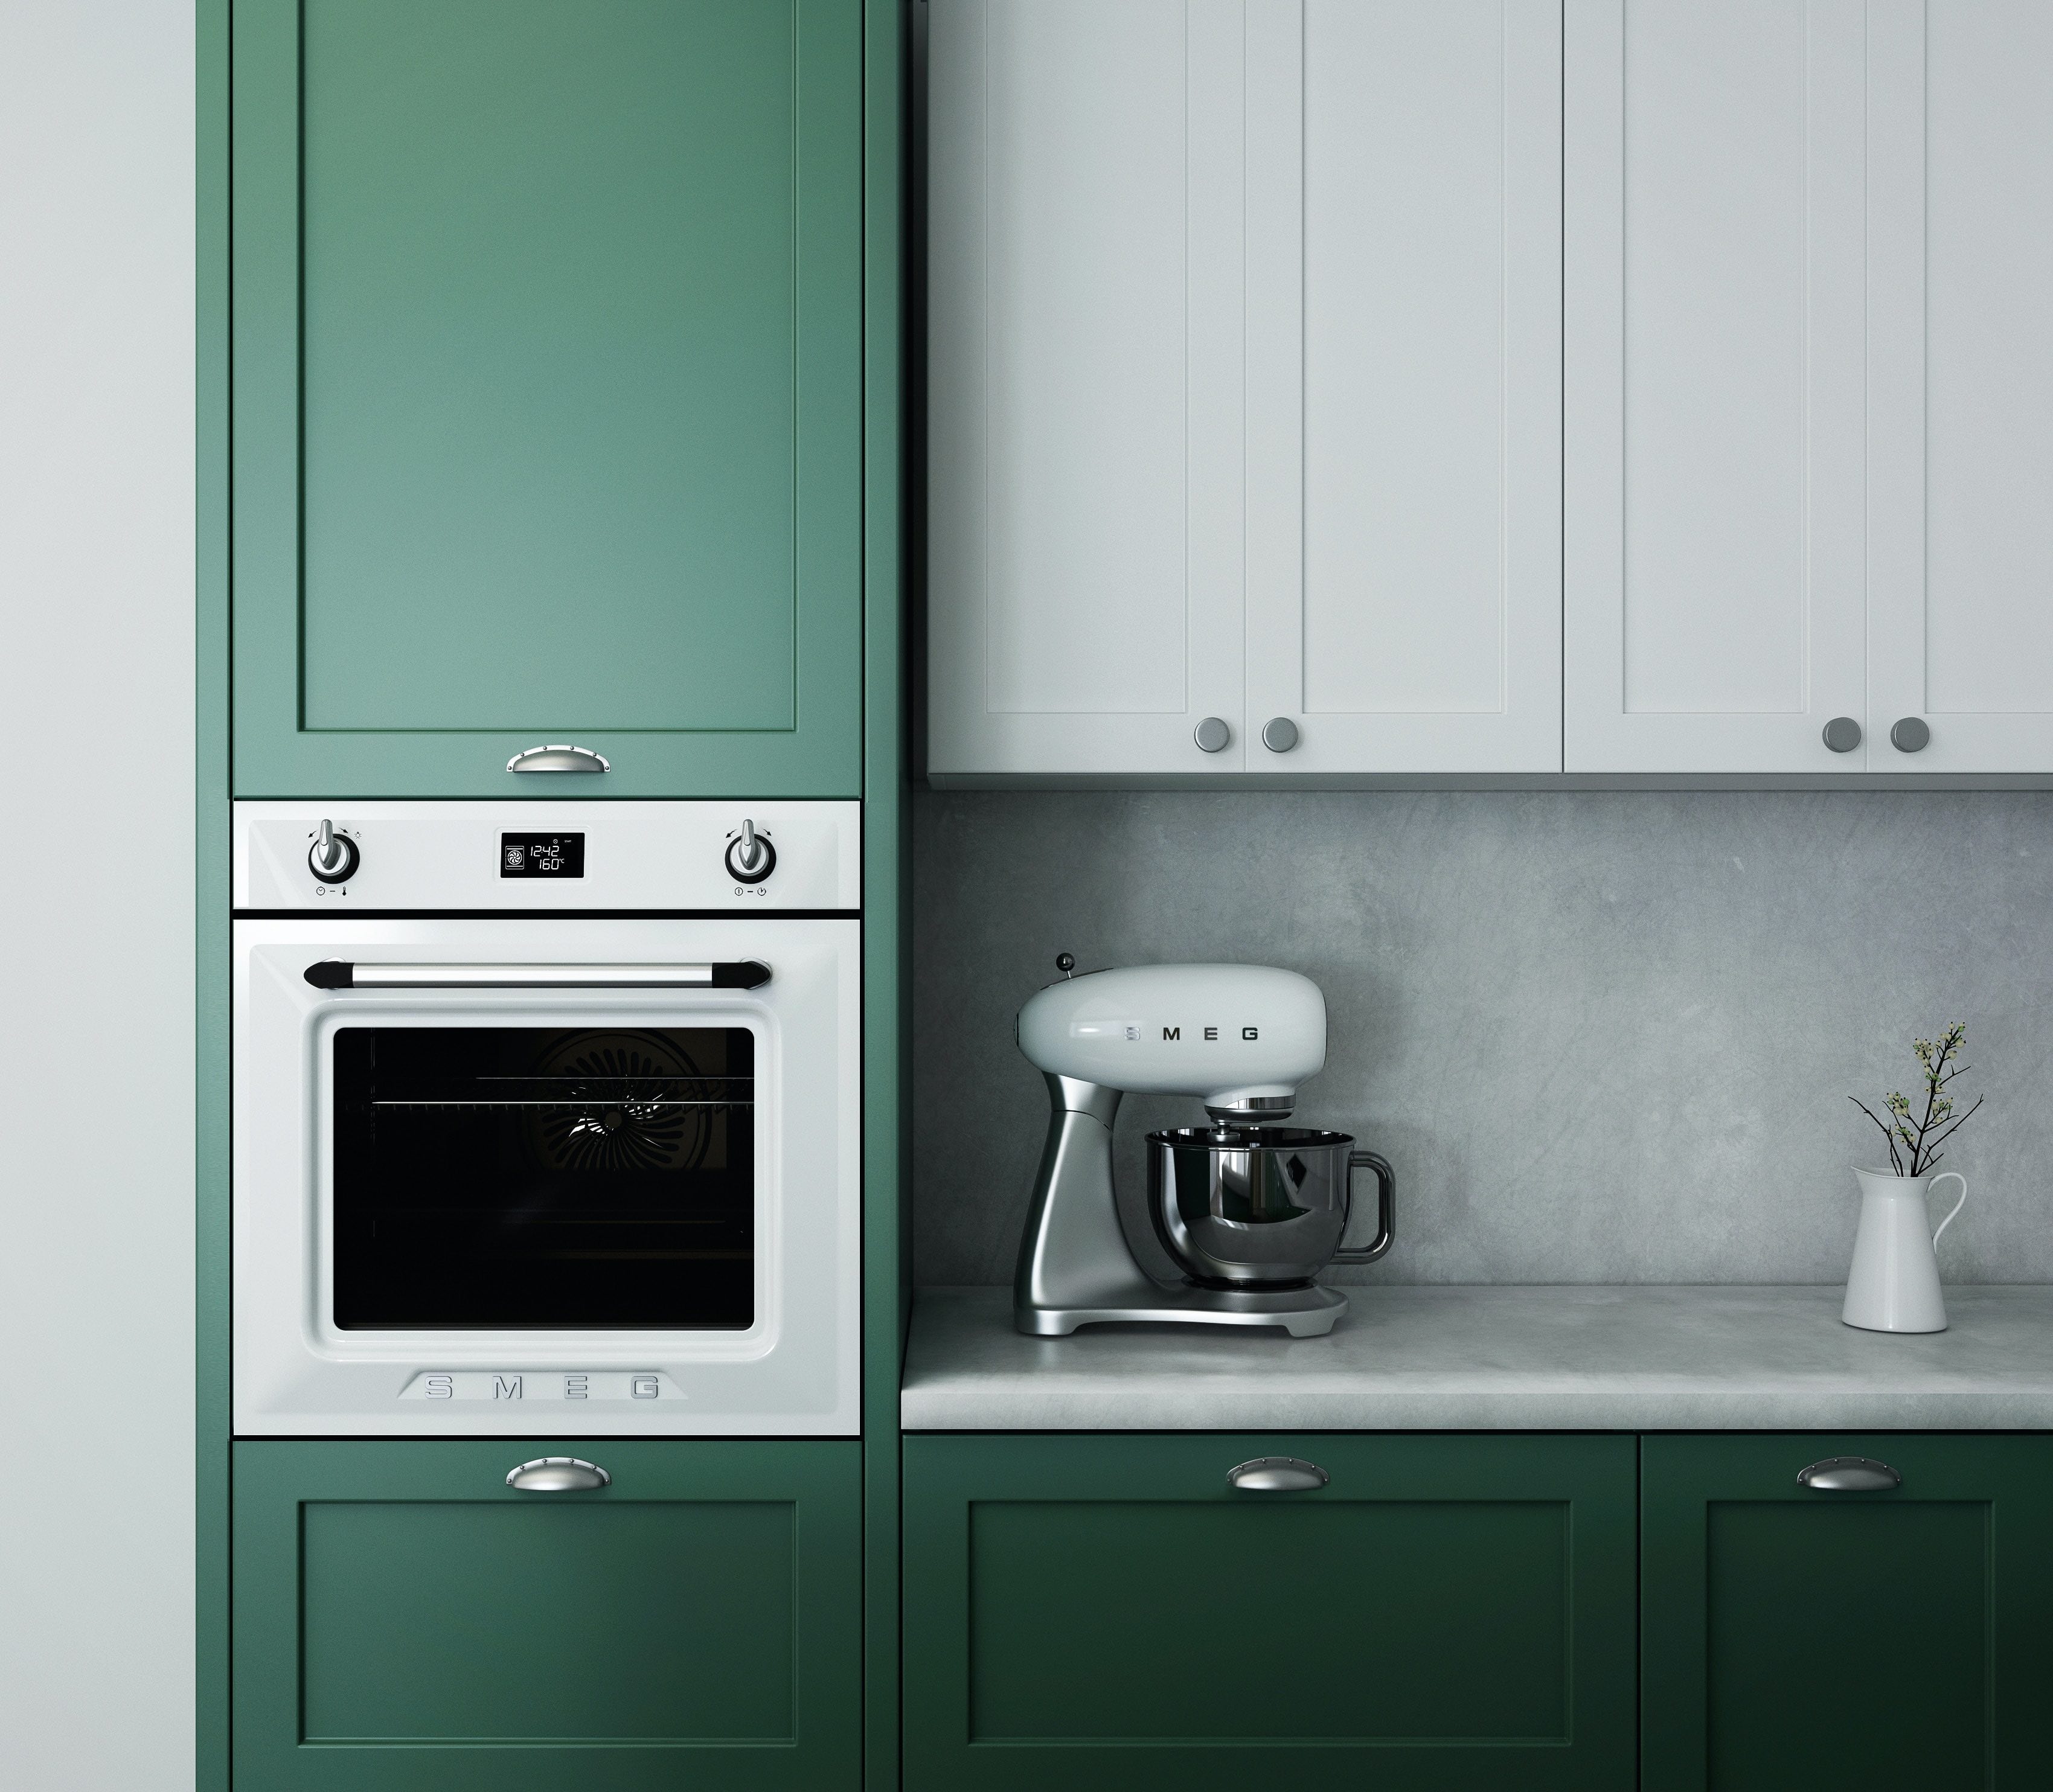 Kitchens are Going Green: Countertop Suggestions for Trending Green Cabinetry